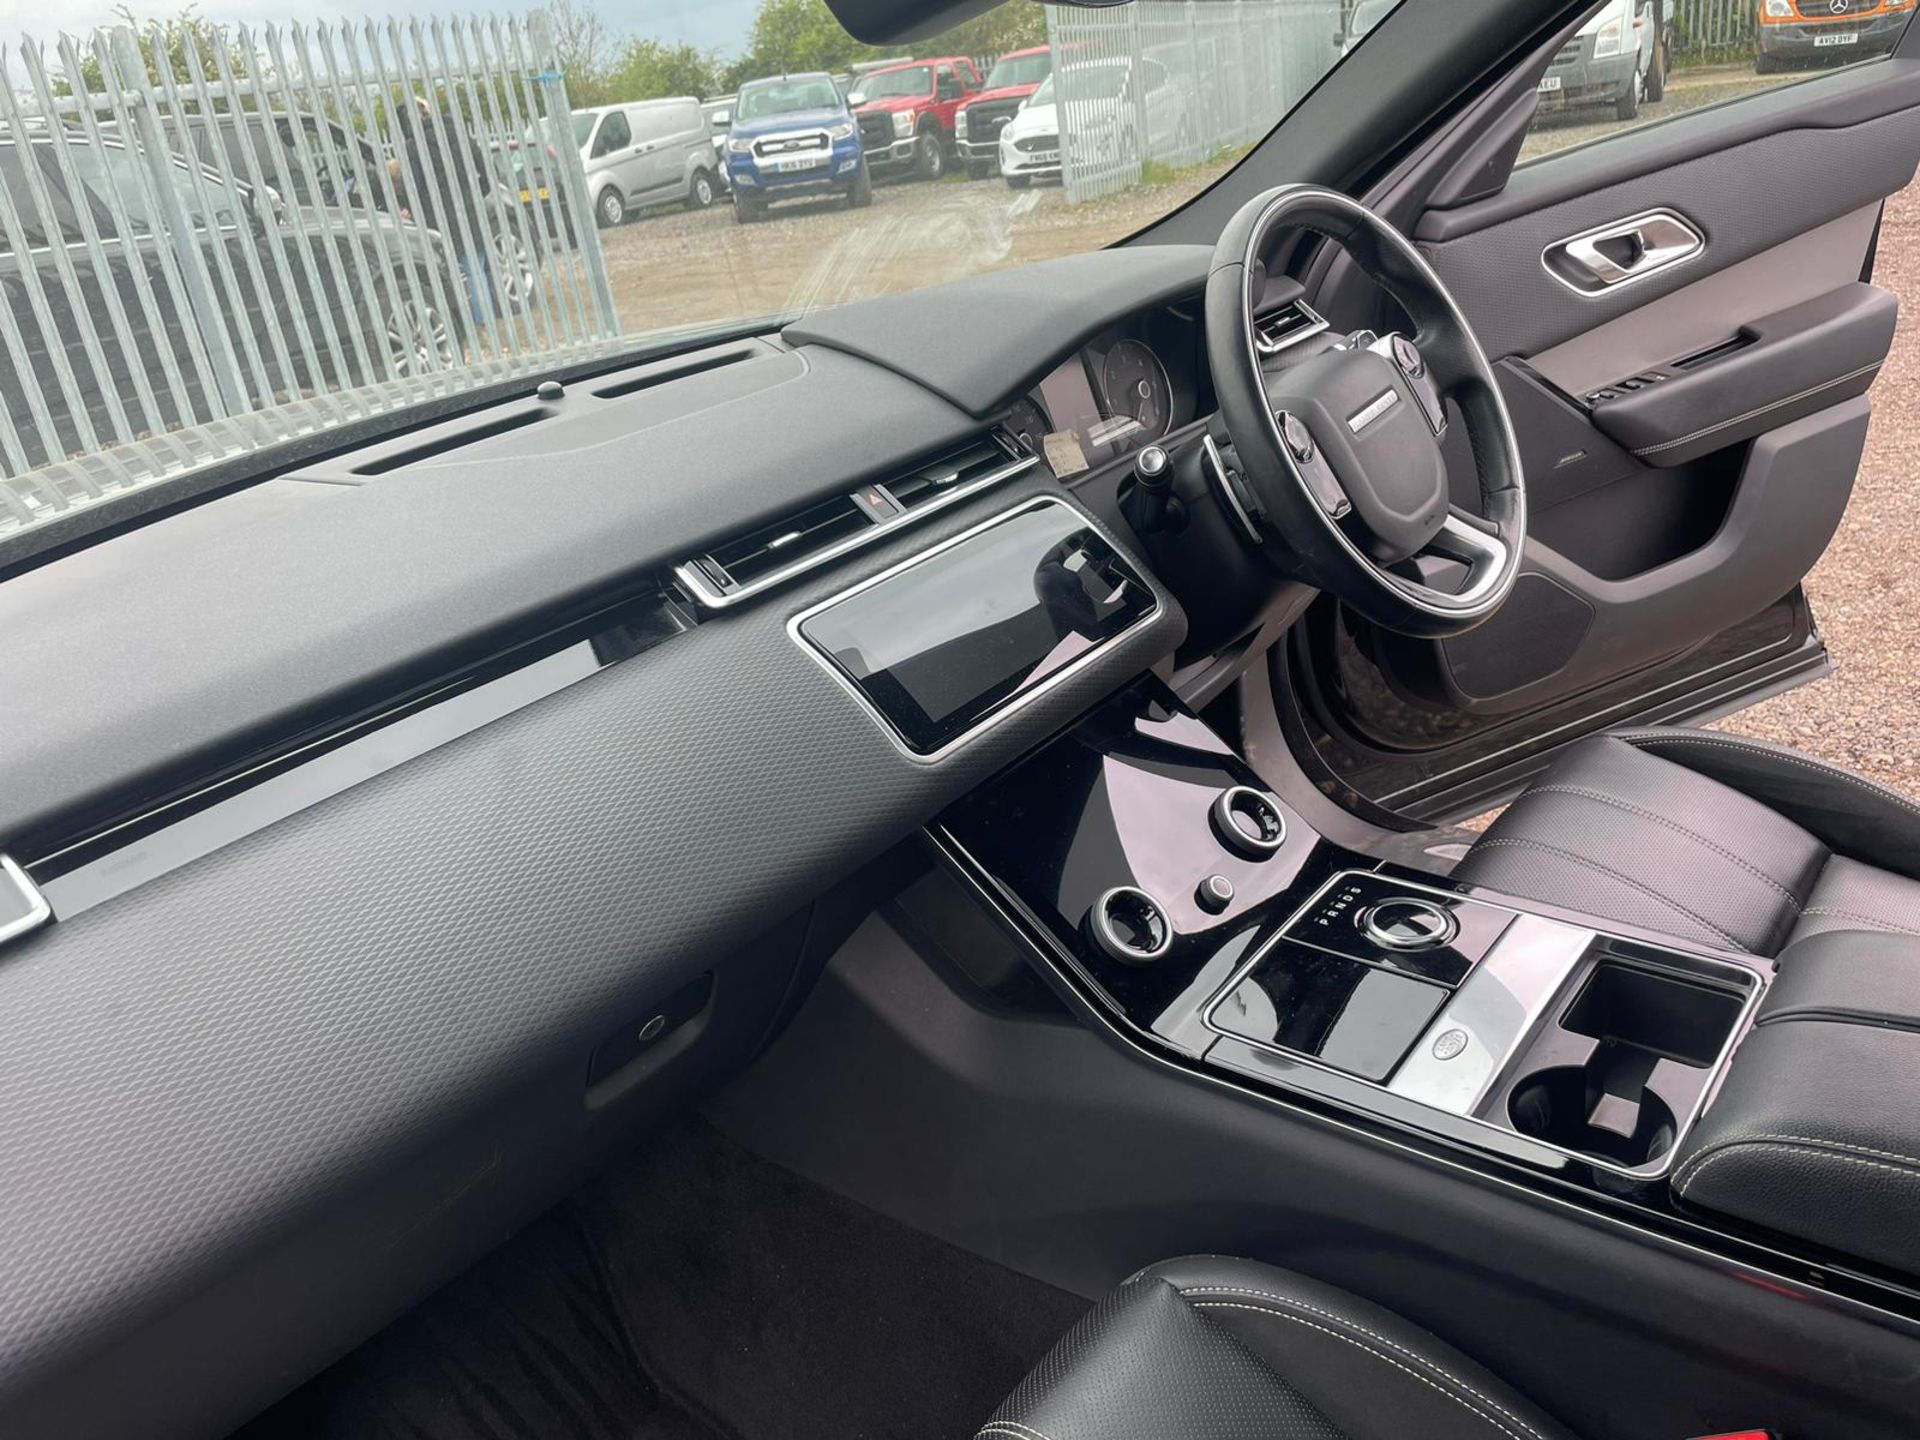 Land Rover Range Rover Velar 2.0 D240 R-Dynamic S 2018 '18 Reg' 4WD - Panoramic Roof- ULEZ Compliant - Image 15 of 33